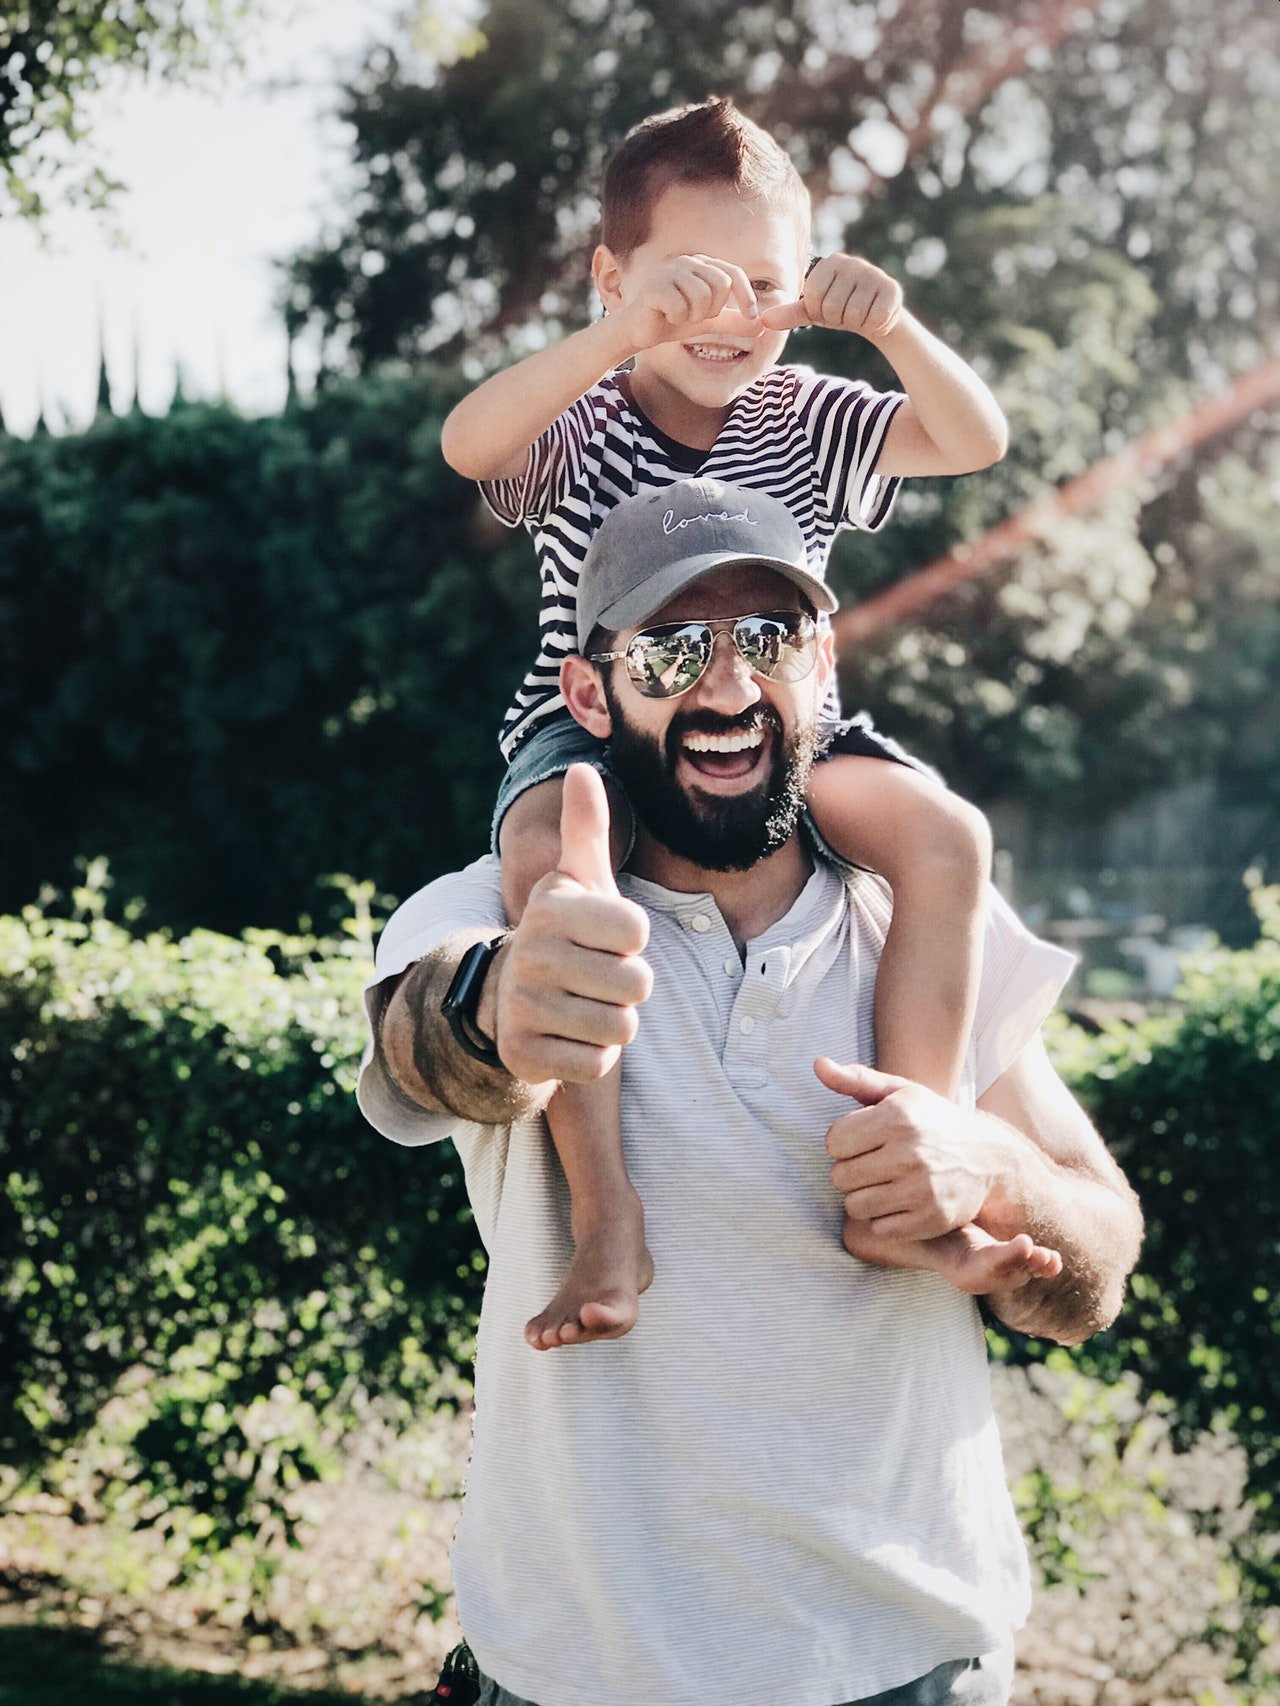 Over the next few years, Charles raised Ryan as his son | Source: Pexels